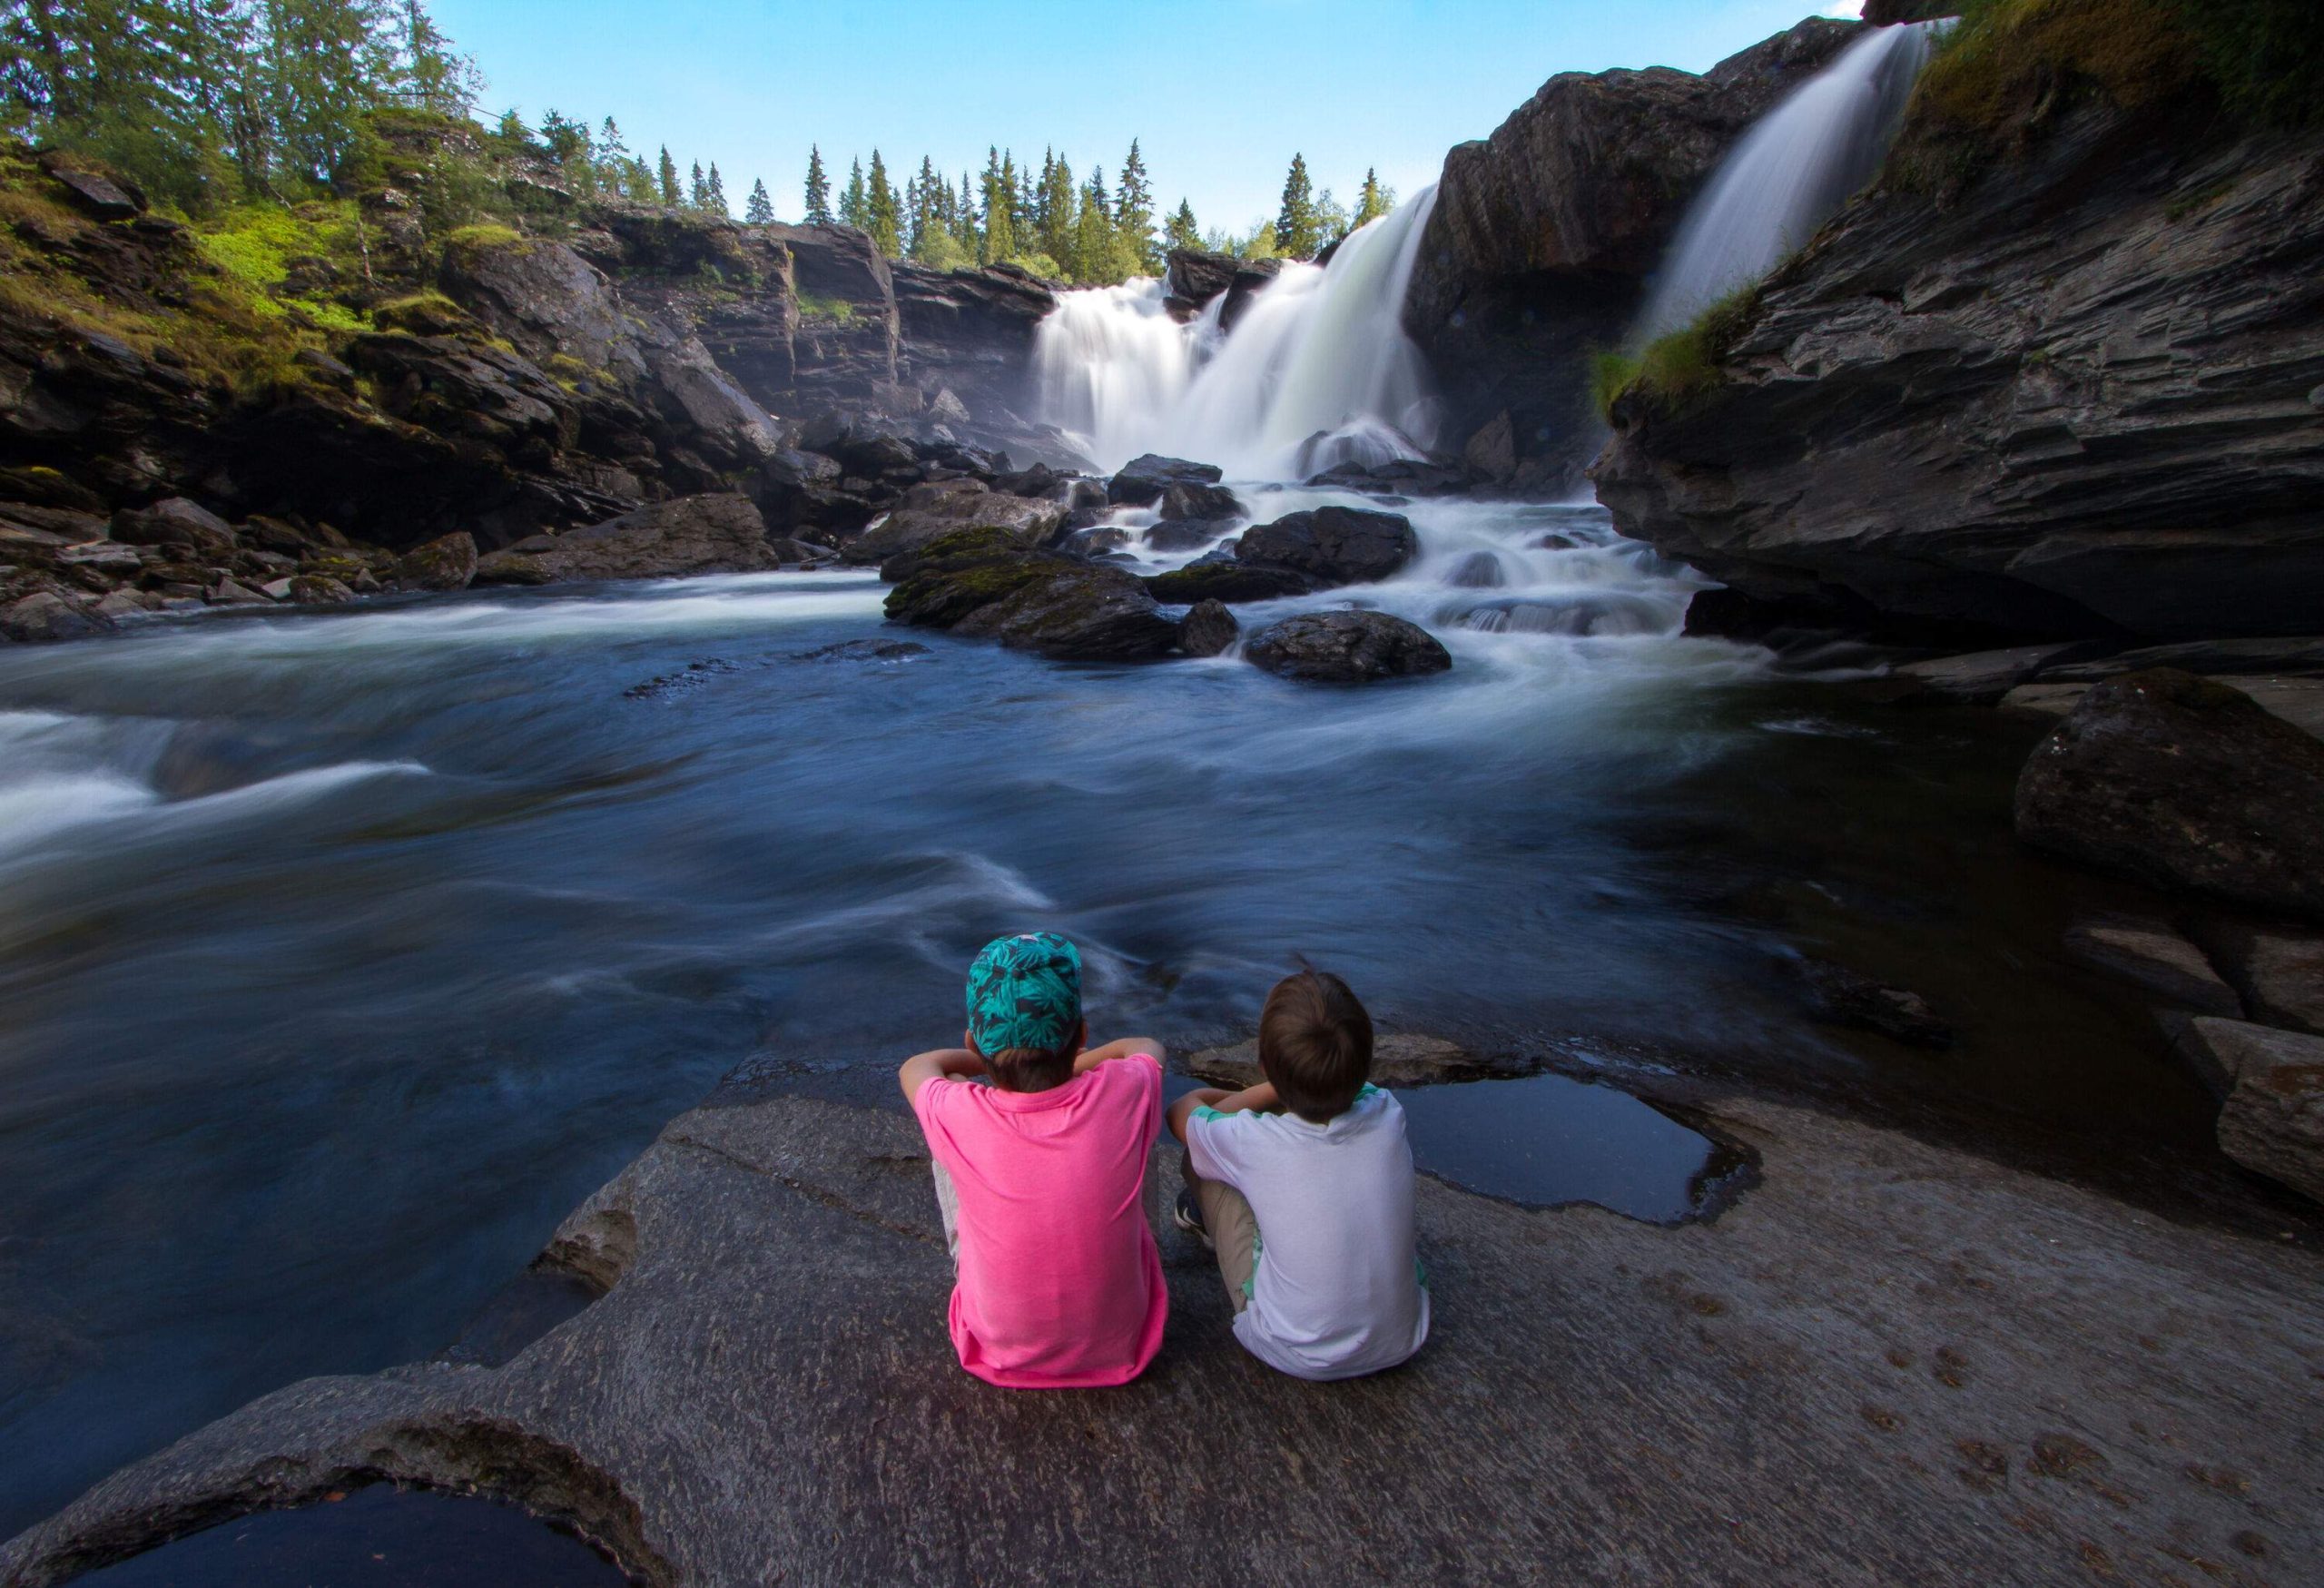 Two kids sit on a flat rock admiring a waterfall that flows into a rocky river.